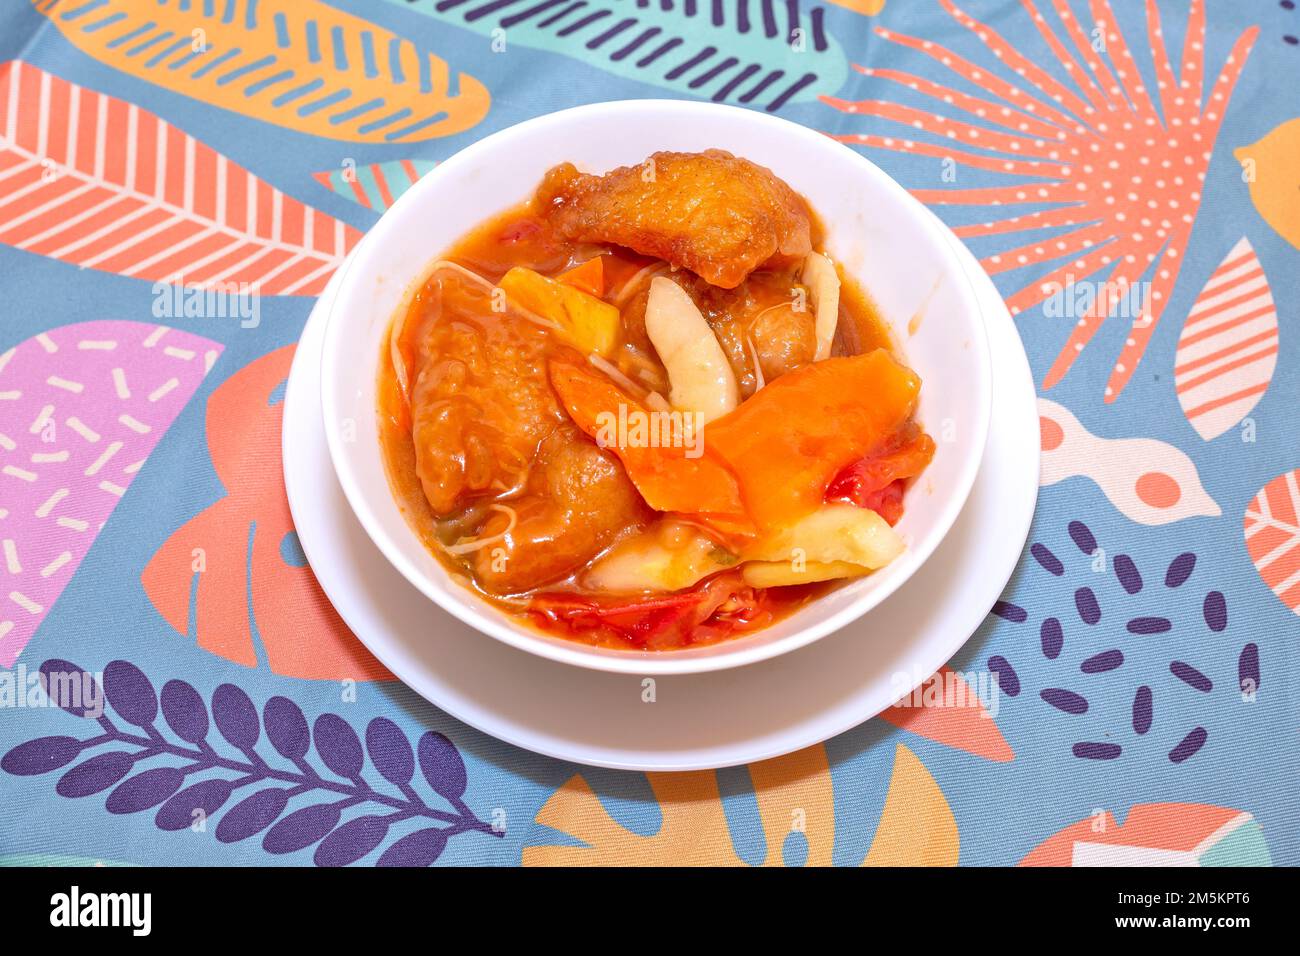 sweet and sour fish dish. Stock Photo